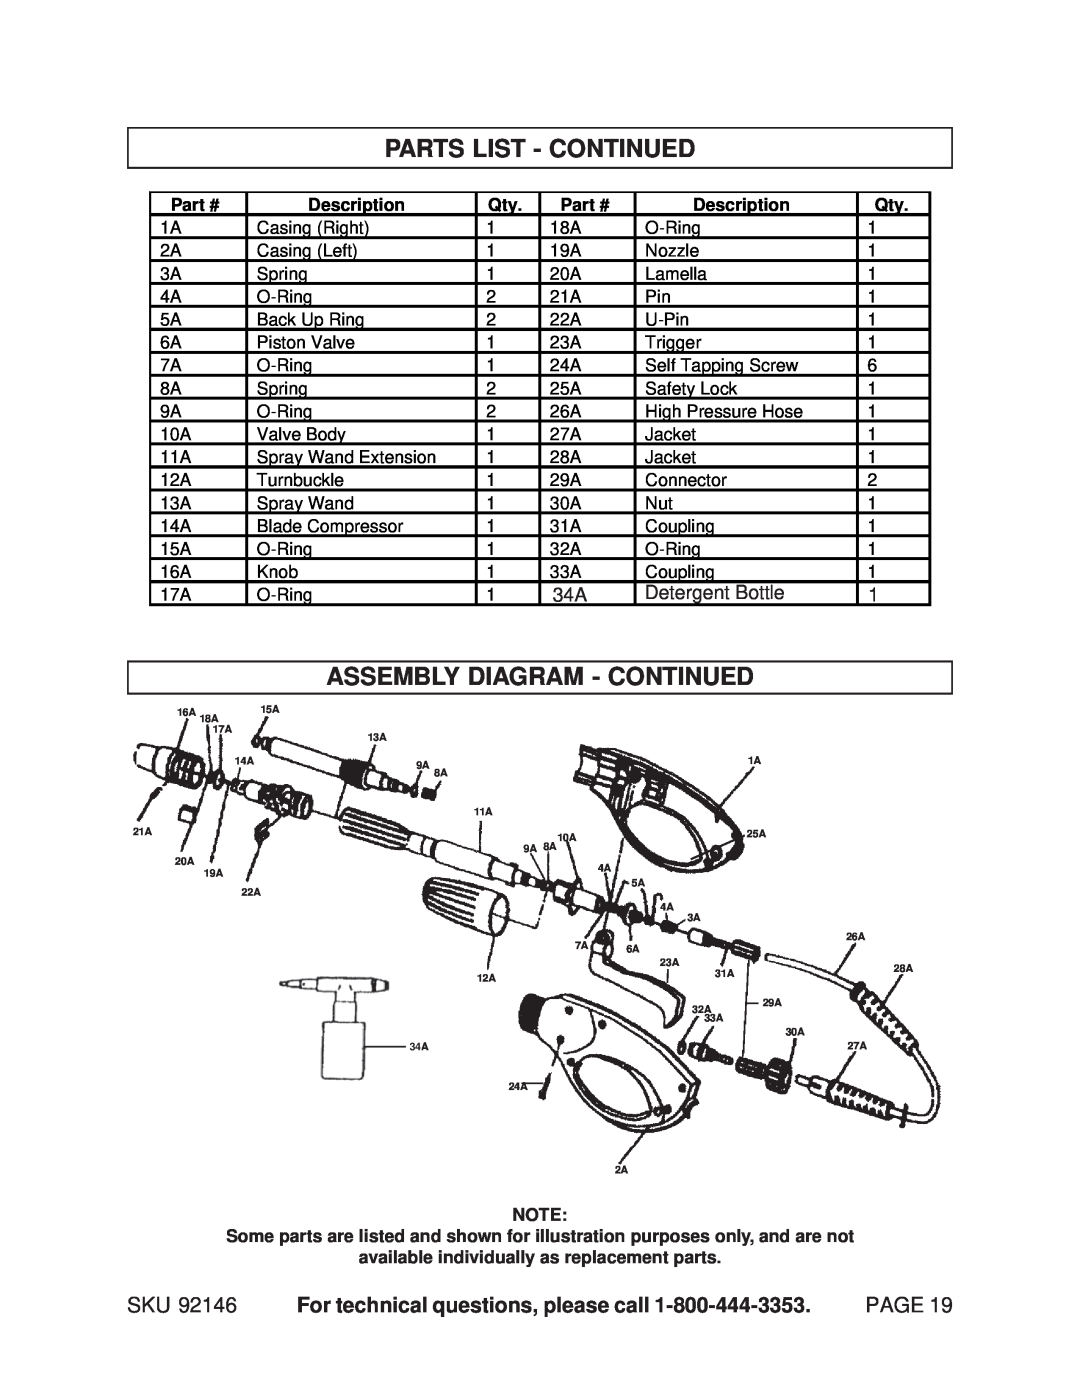 Chicago Electric 92146 Parts List - Continued, Assembly Diagram - Continued, For technical questions, please call, Page 